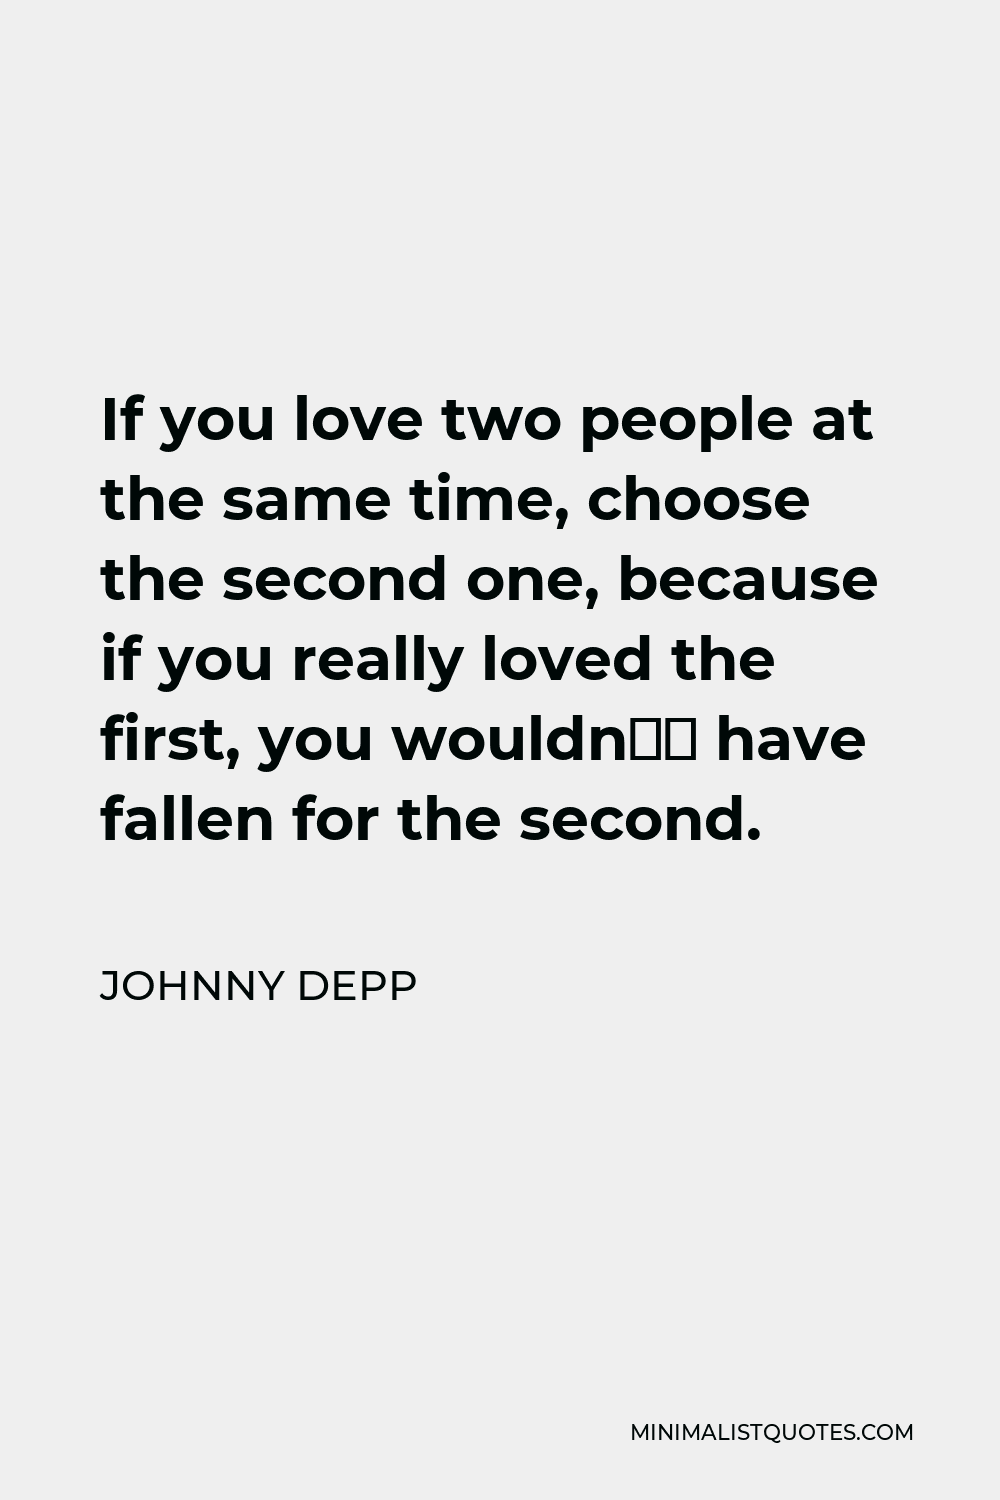 Johnny Depp Quote - If you love two people at the same time, choose the second one, because if you really loved the first, you wouldn’t have fallen for the second.